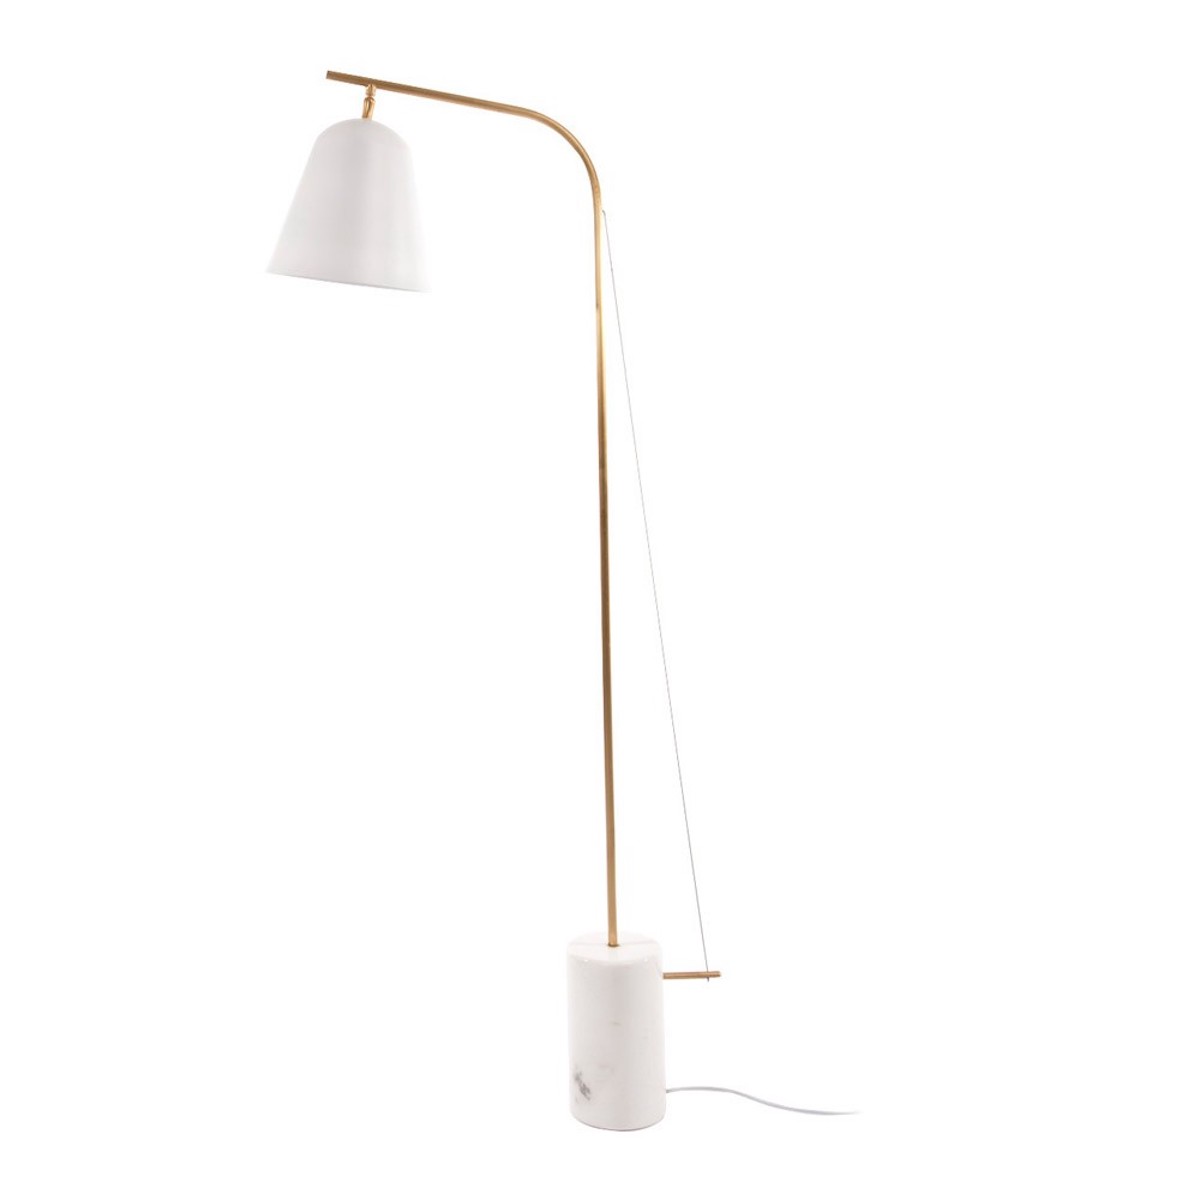 Line Two lamp